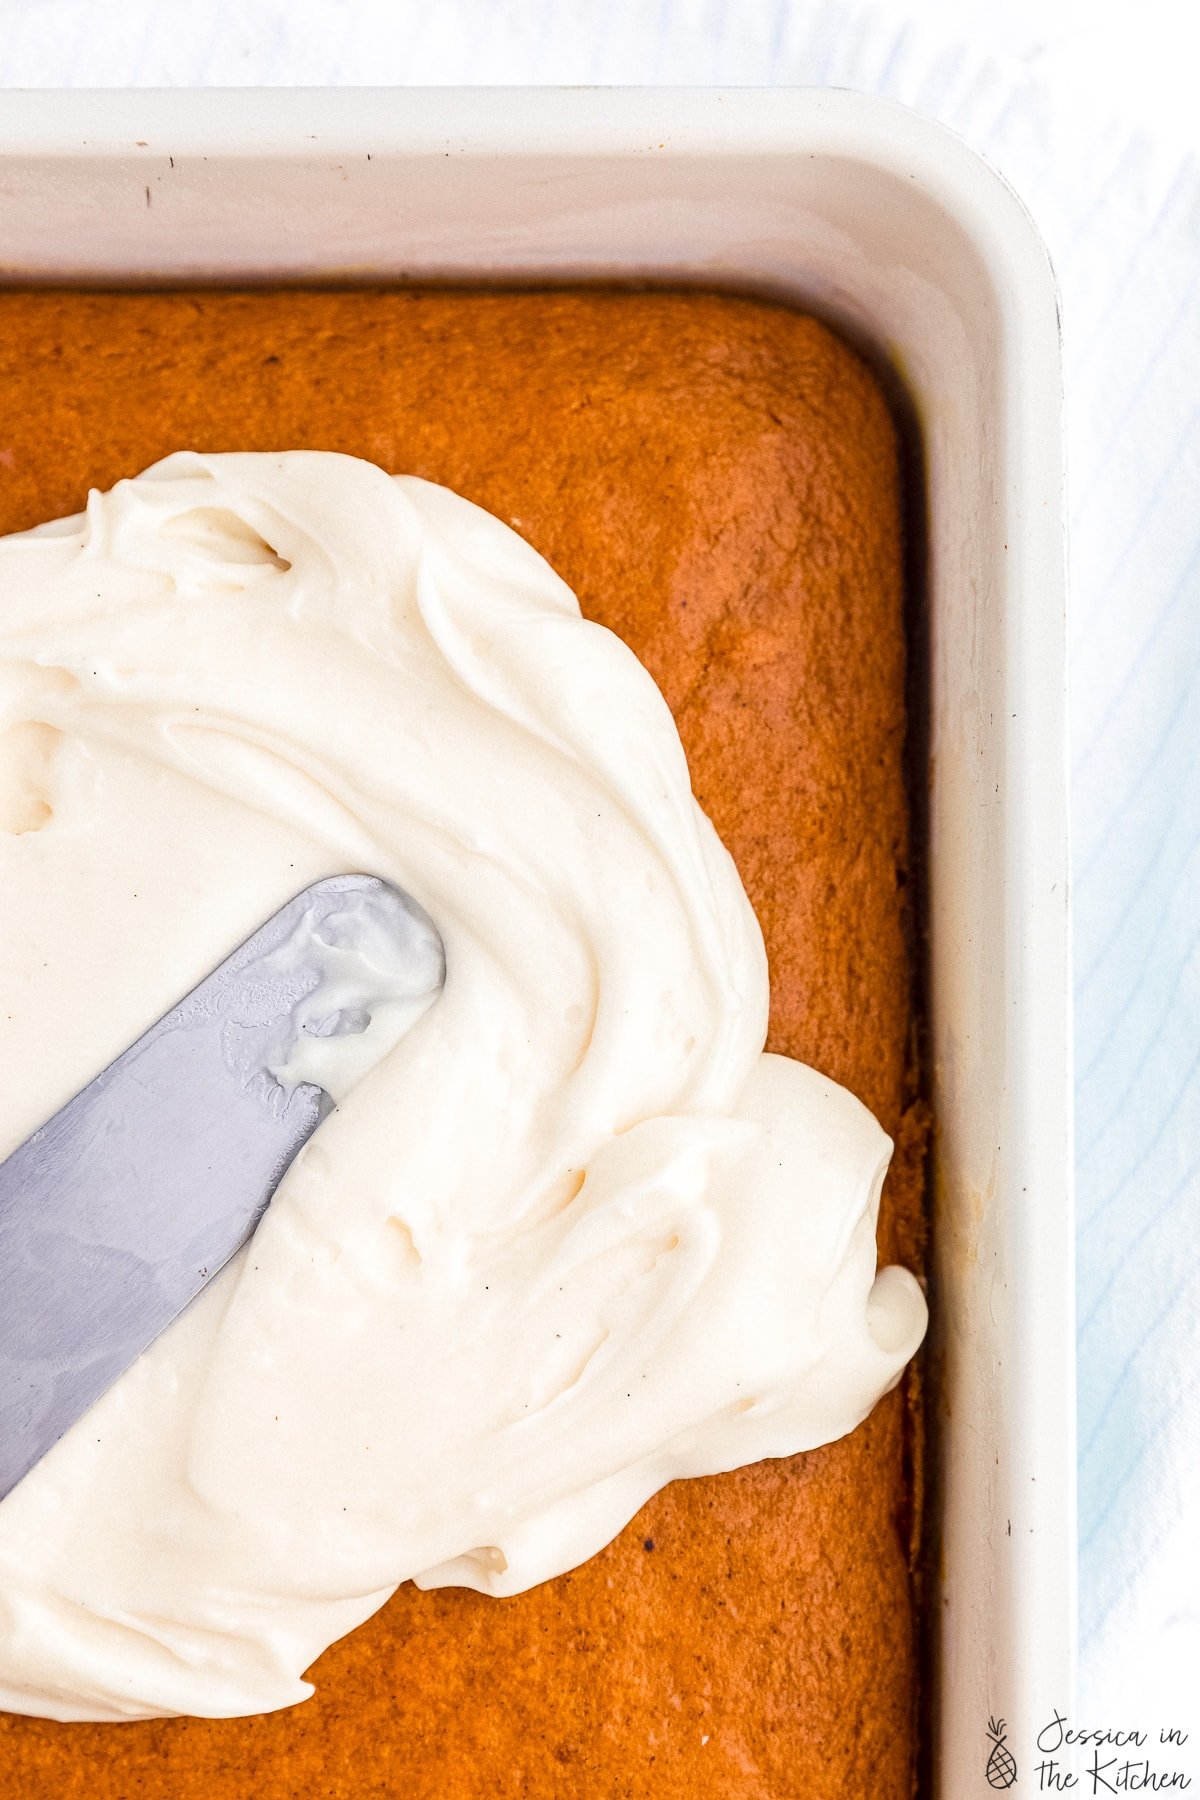 Cream cheese frosting being spread across an orange pumpkin cake with a silver offset spatula.